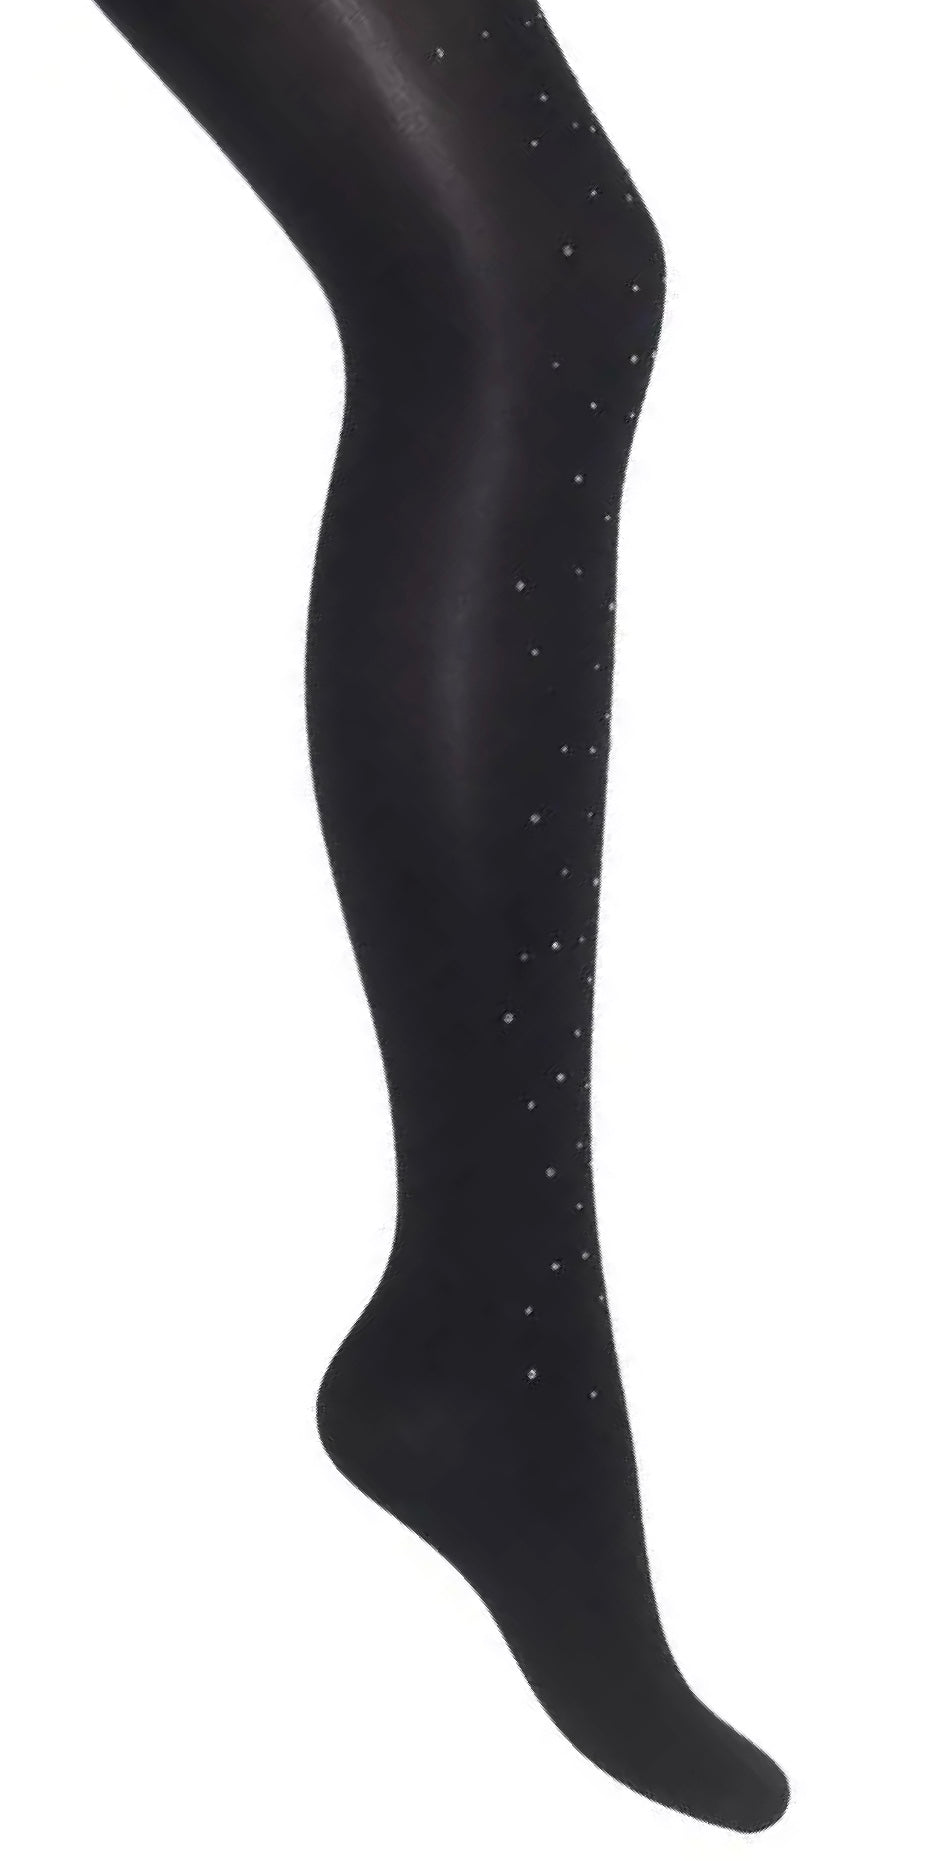 Bonnie Doon bn75.19.68 Chic Tights - black opaque tights with sparkly diamant̩ rhinestones dotted all over, perfect for party season